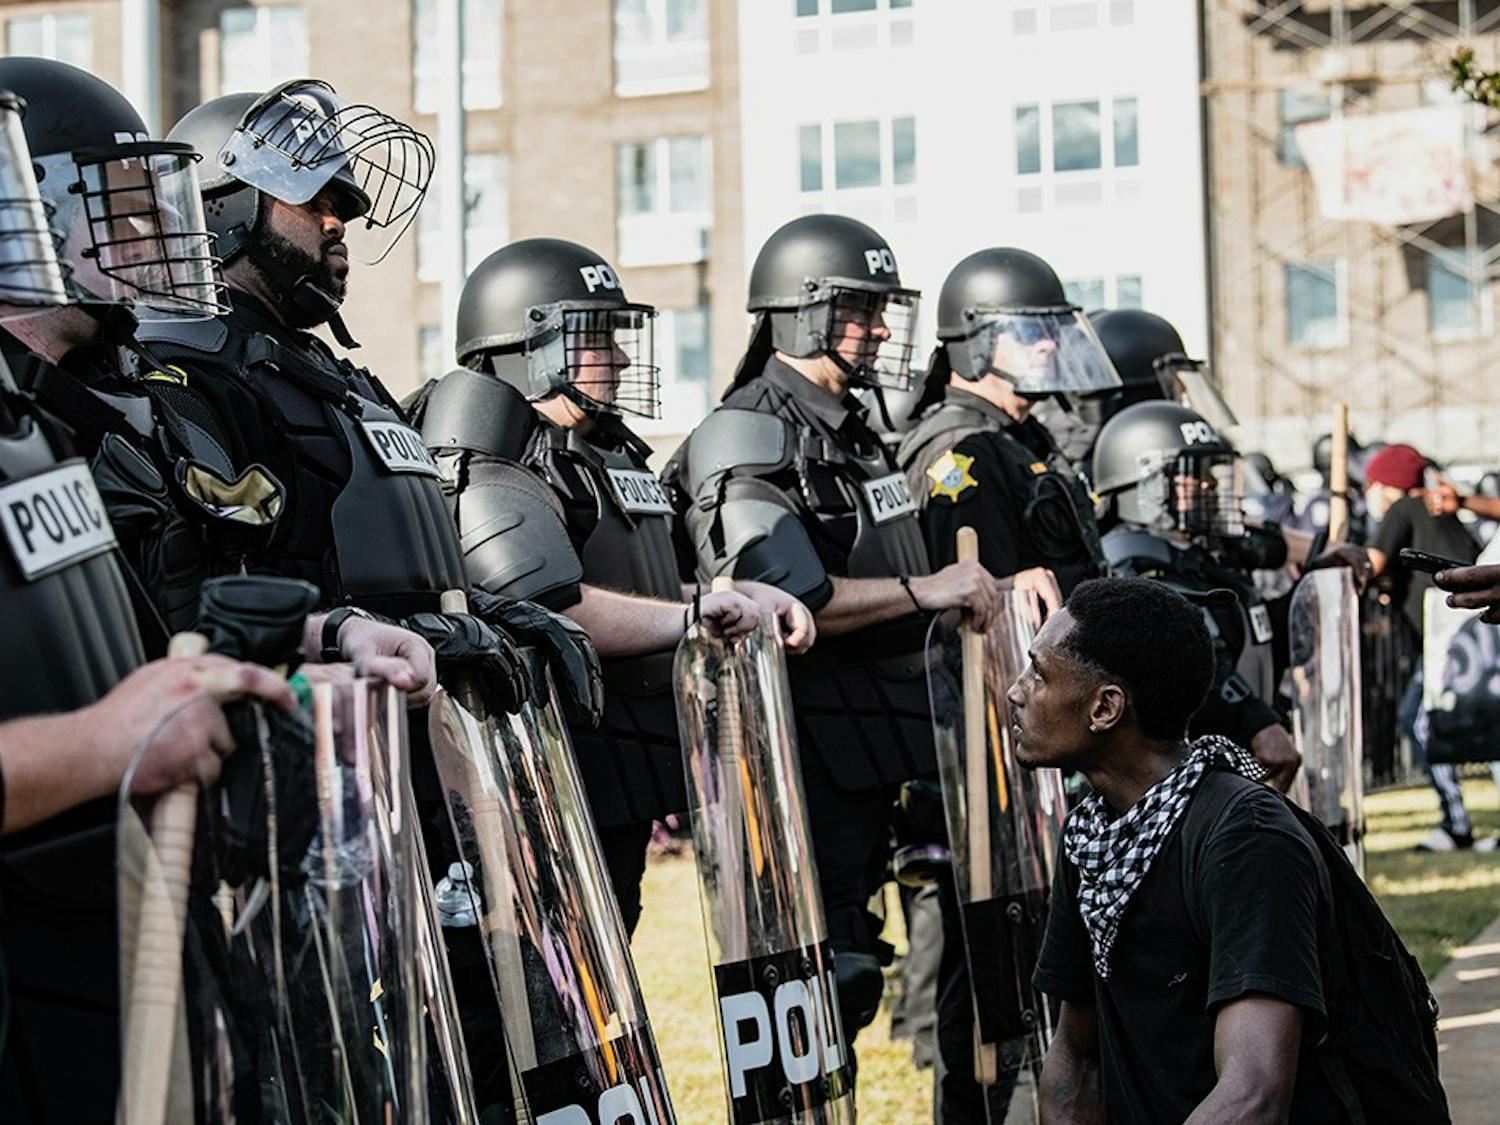 A photograph by Crush Rush, one of the five photo journalists featured at the Hindsight 2020 exhibit, which features pictures of events that defined 2020. This popular image captures a protestor kneeling and looking up at a Black police officer at a police brutality protest at the Statehouse following the death of George Floyd.